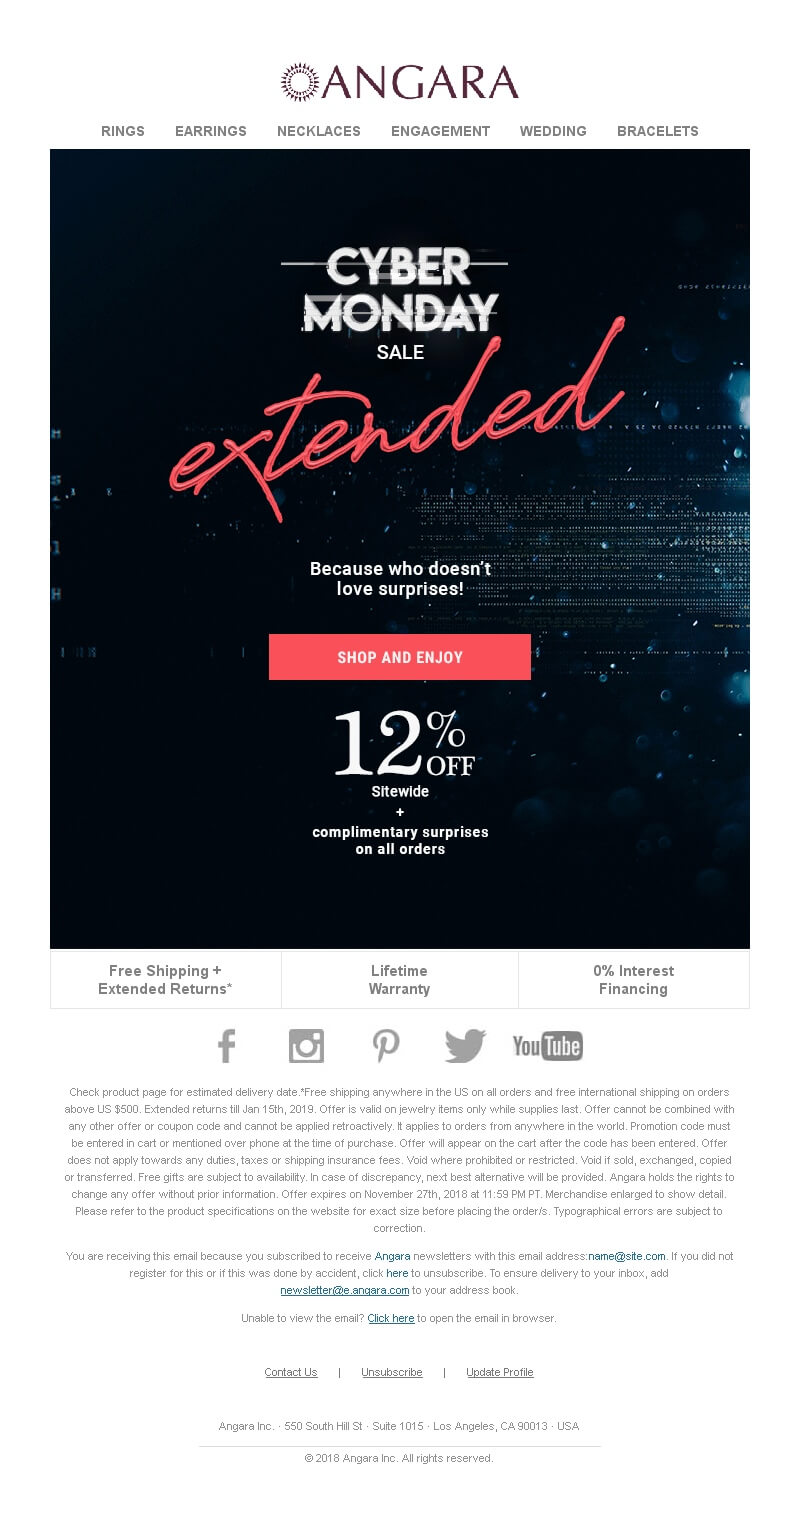 An email announcing that the sale has been extended